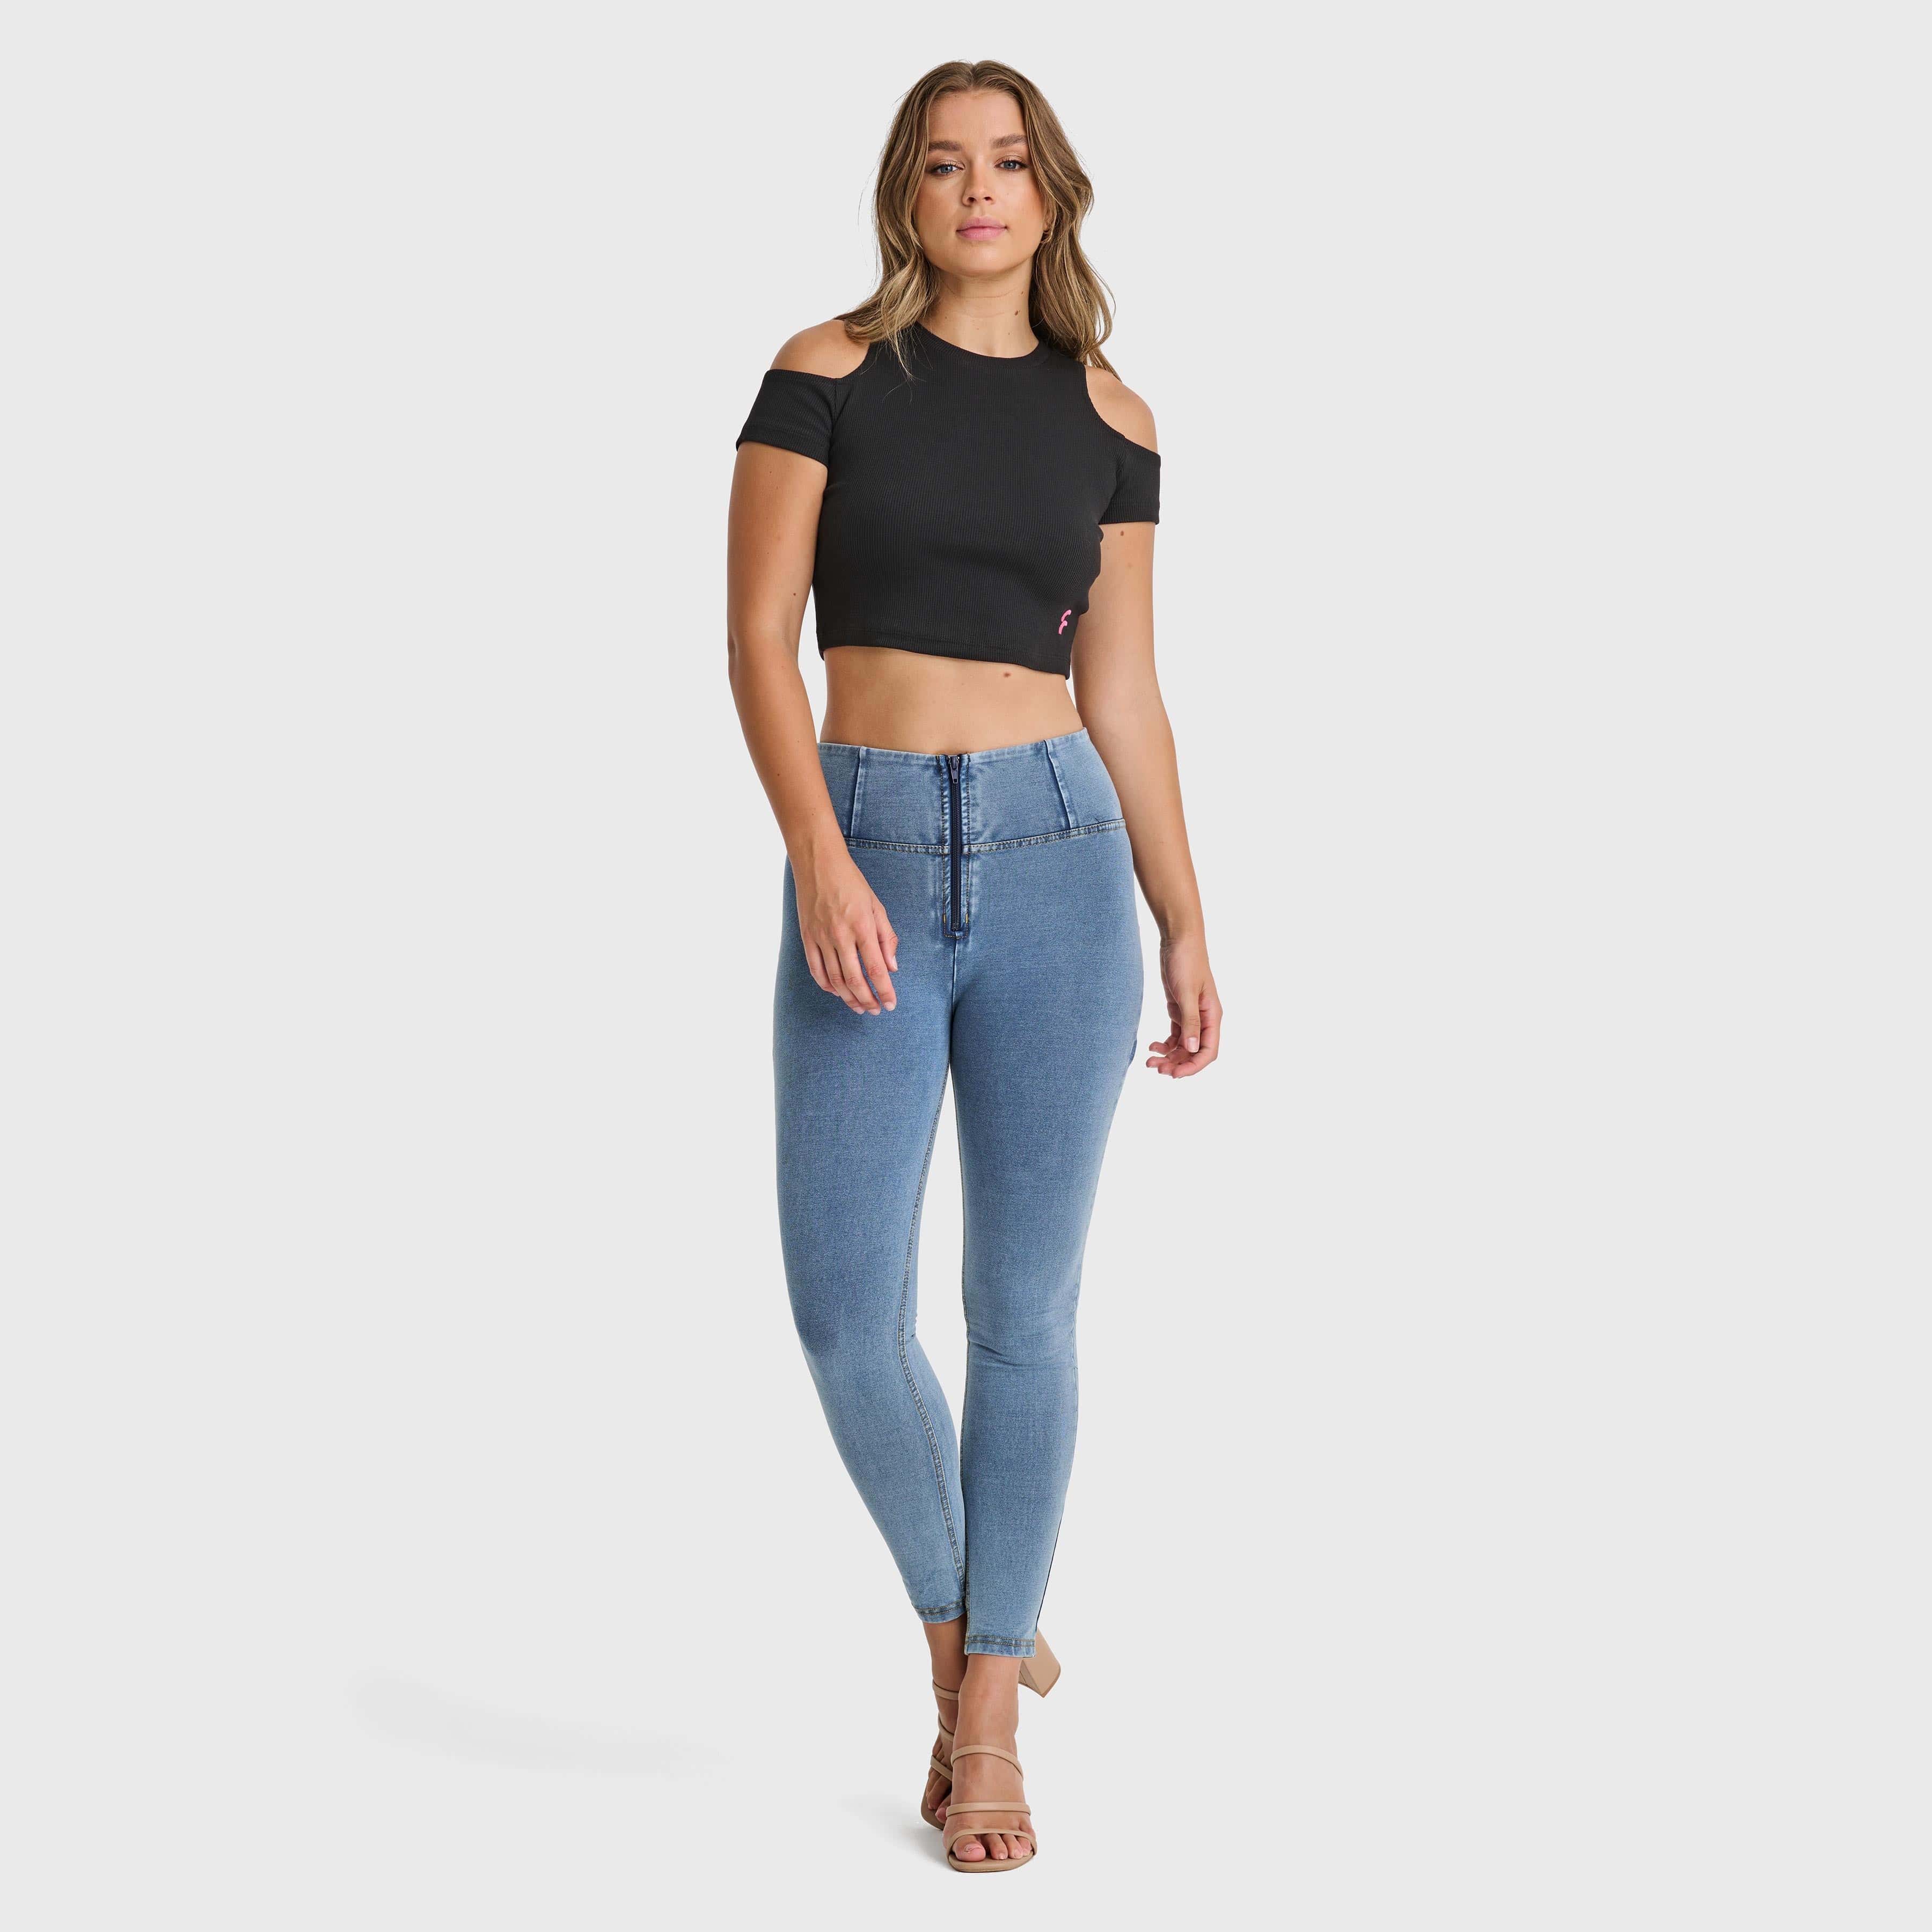 Cropped Cut Out T Shirt - Black 3